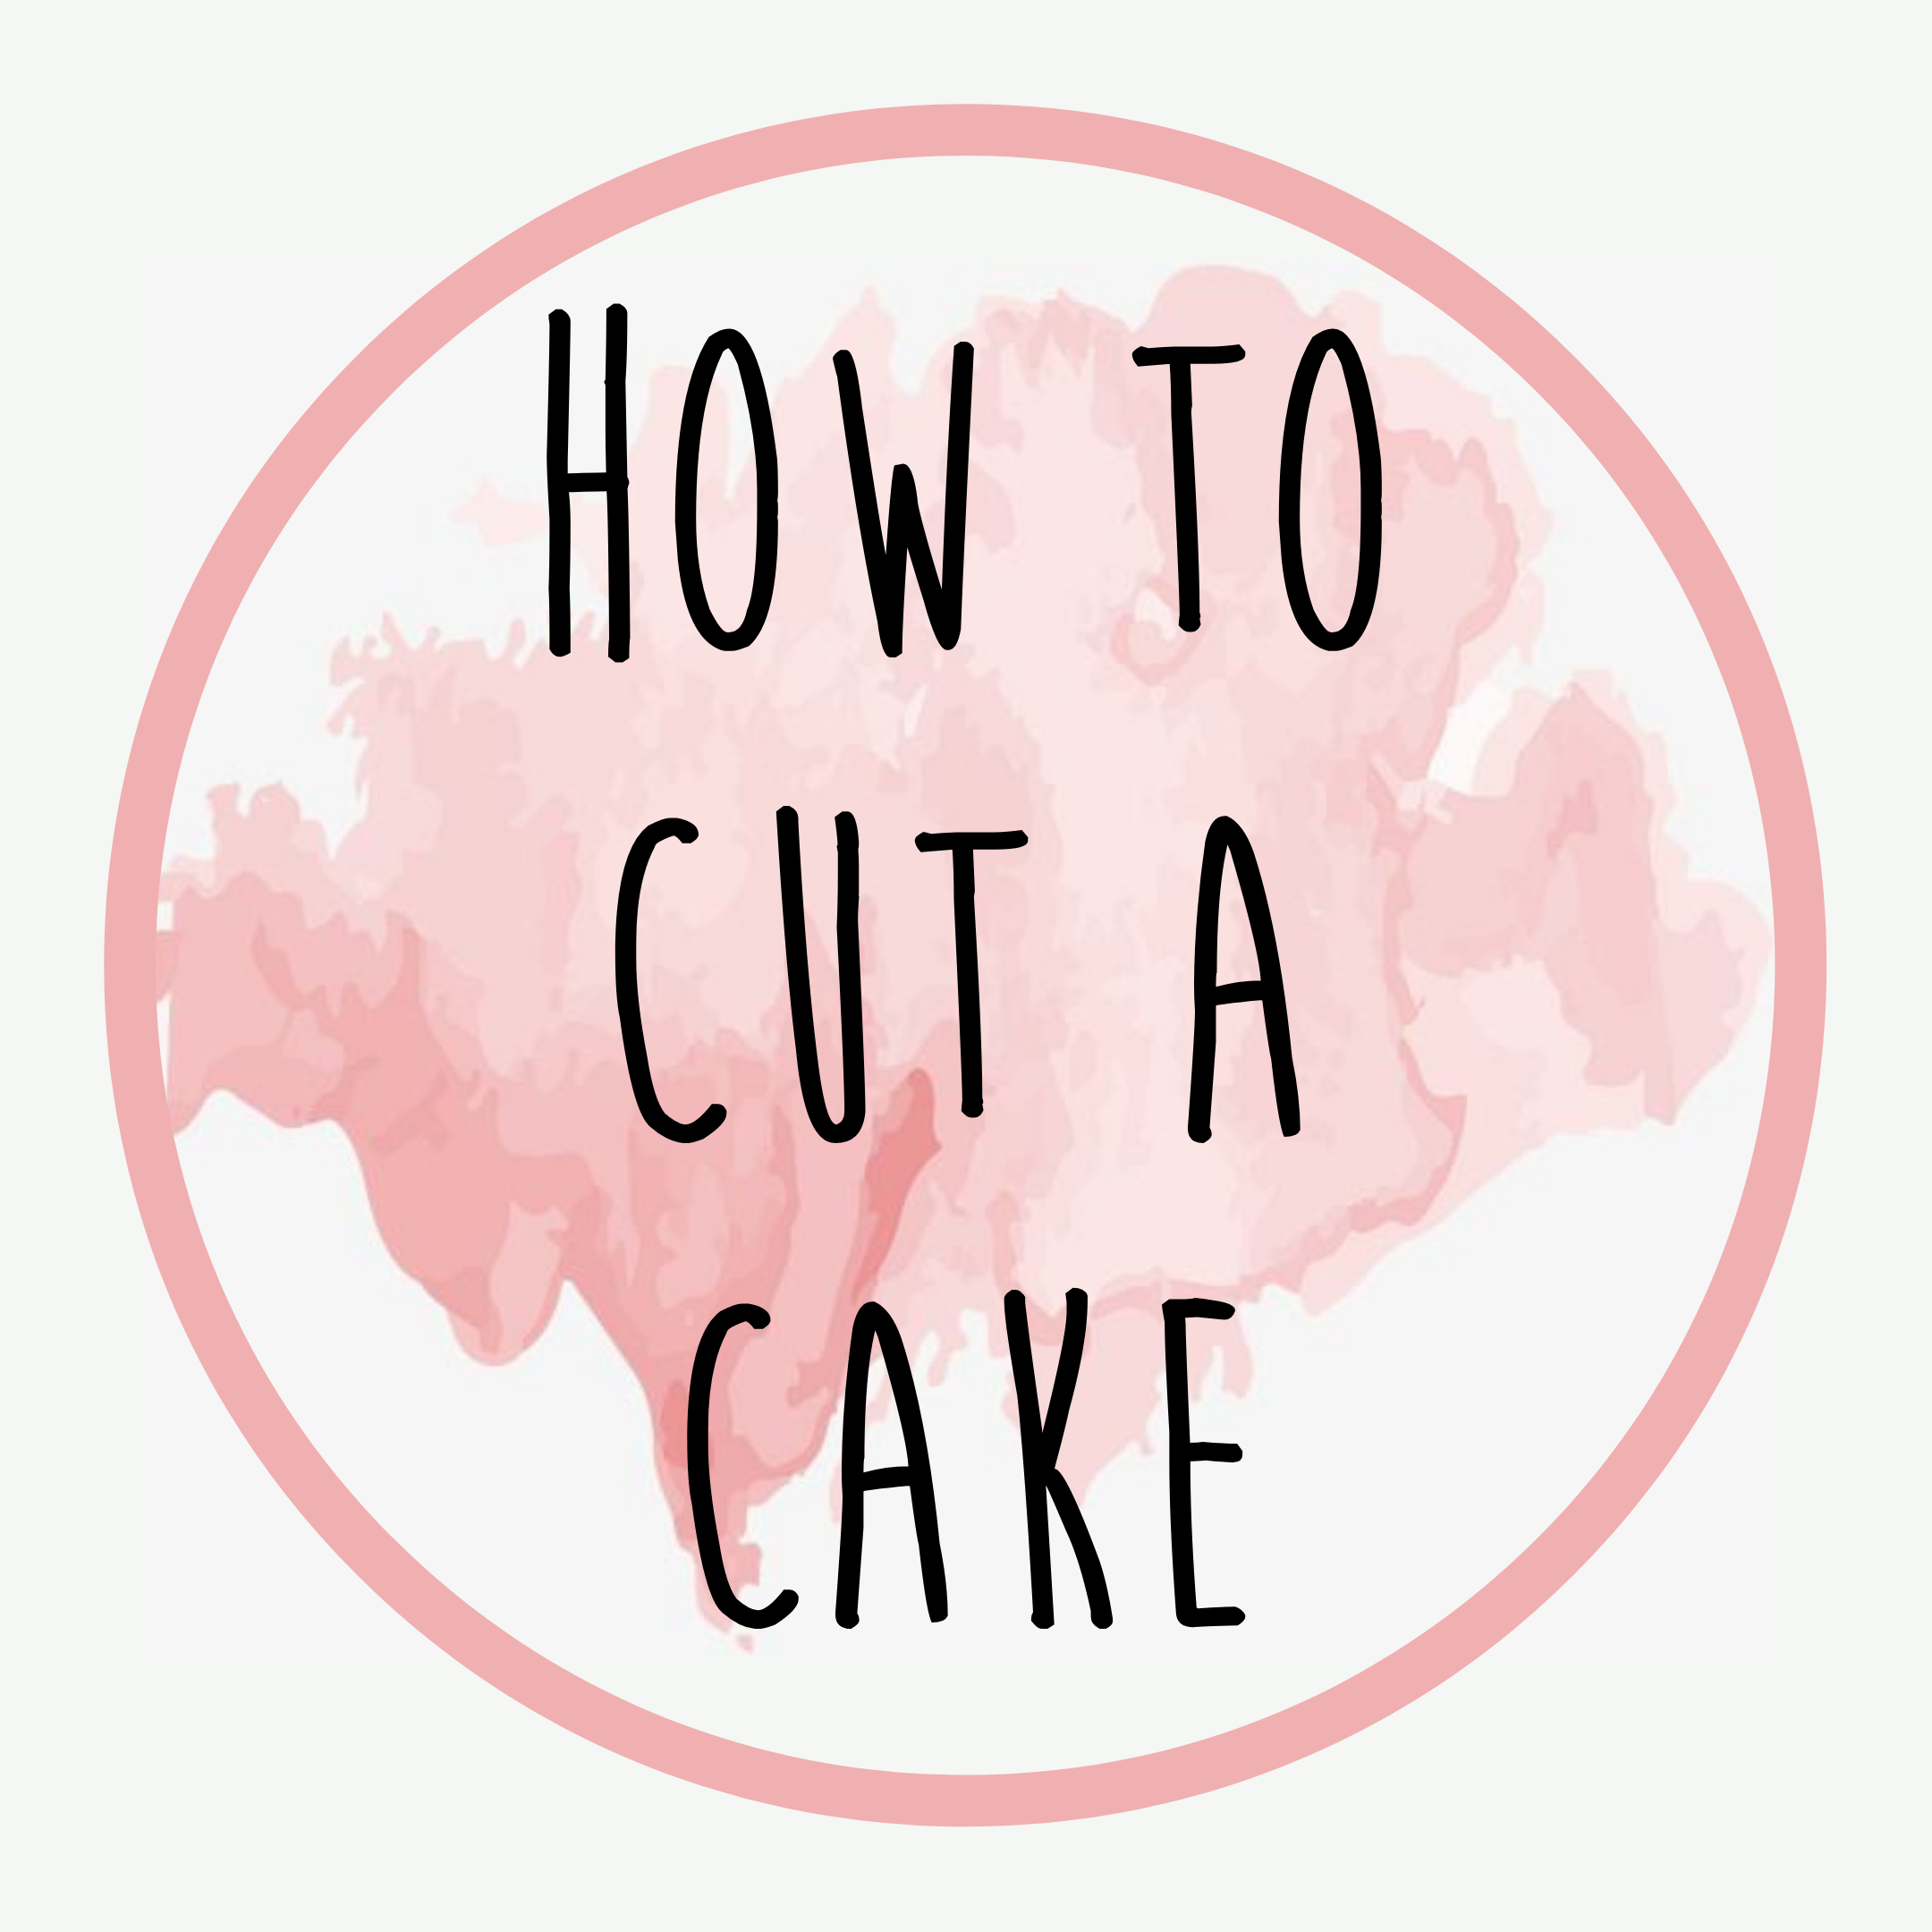 How to cut a cake